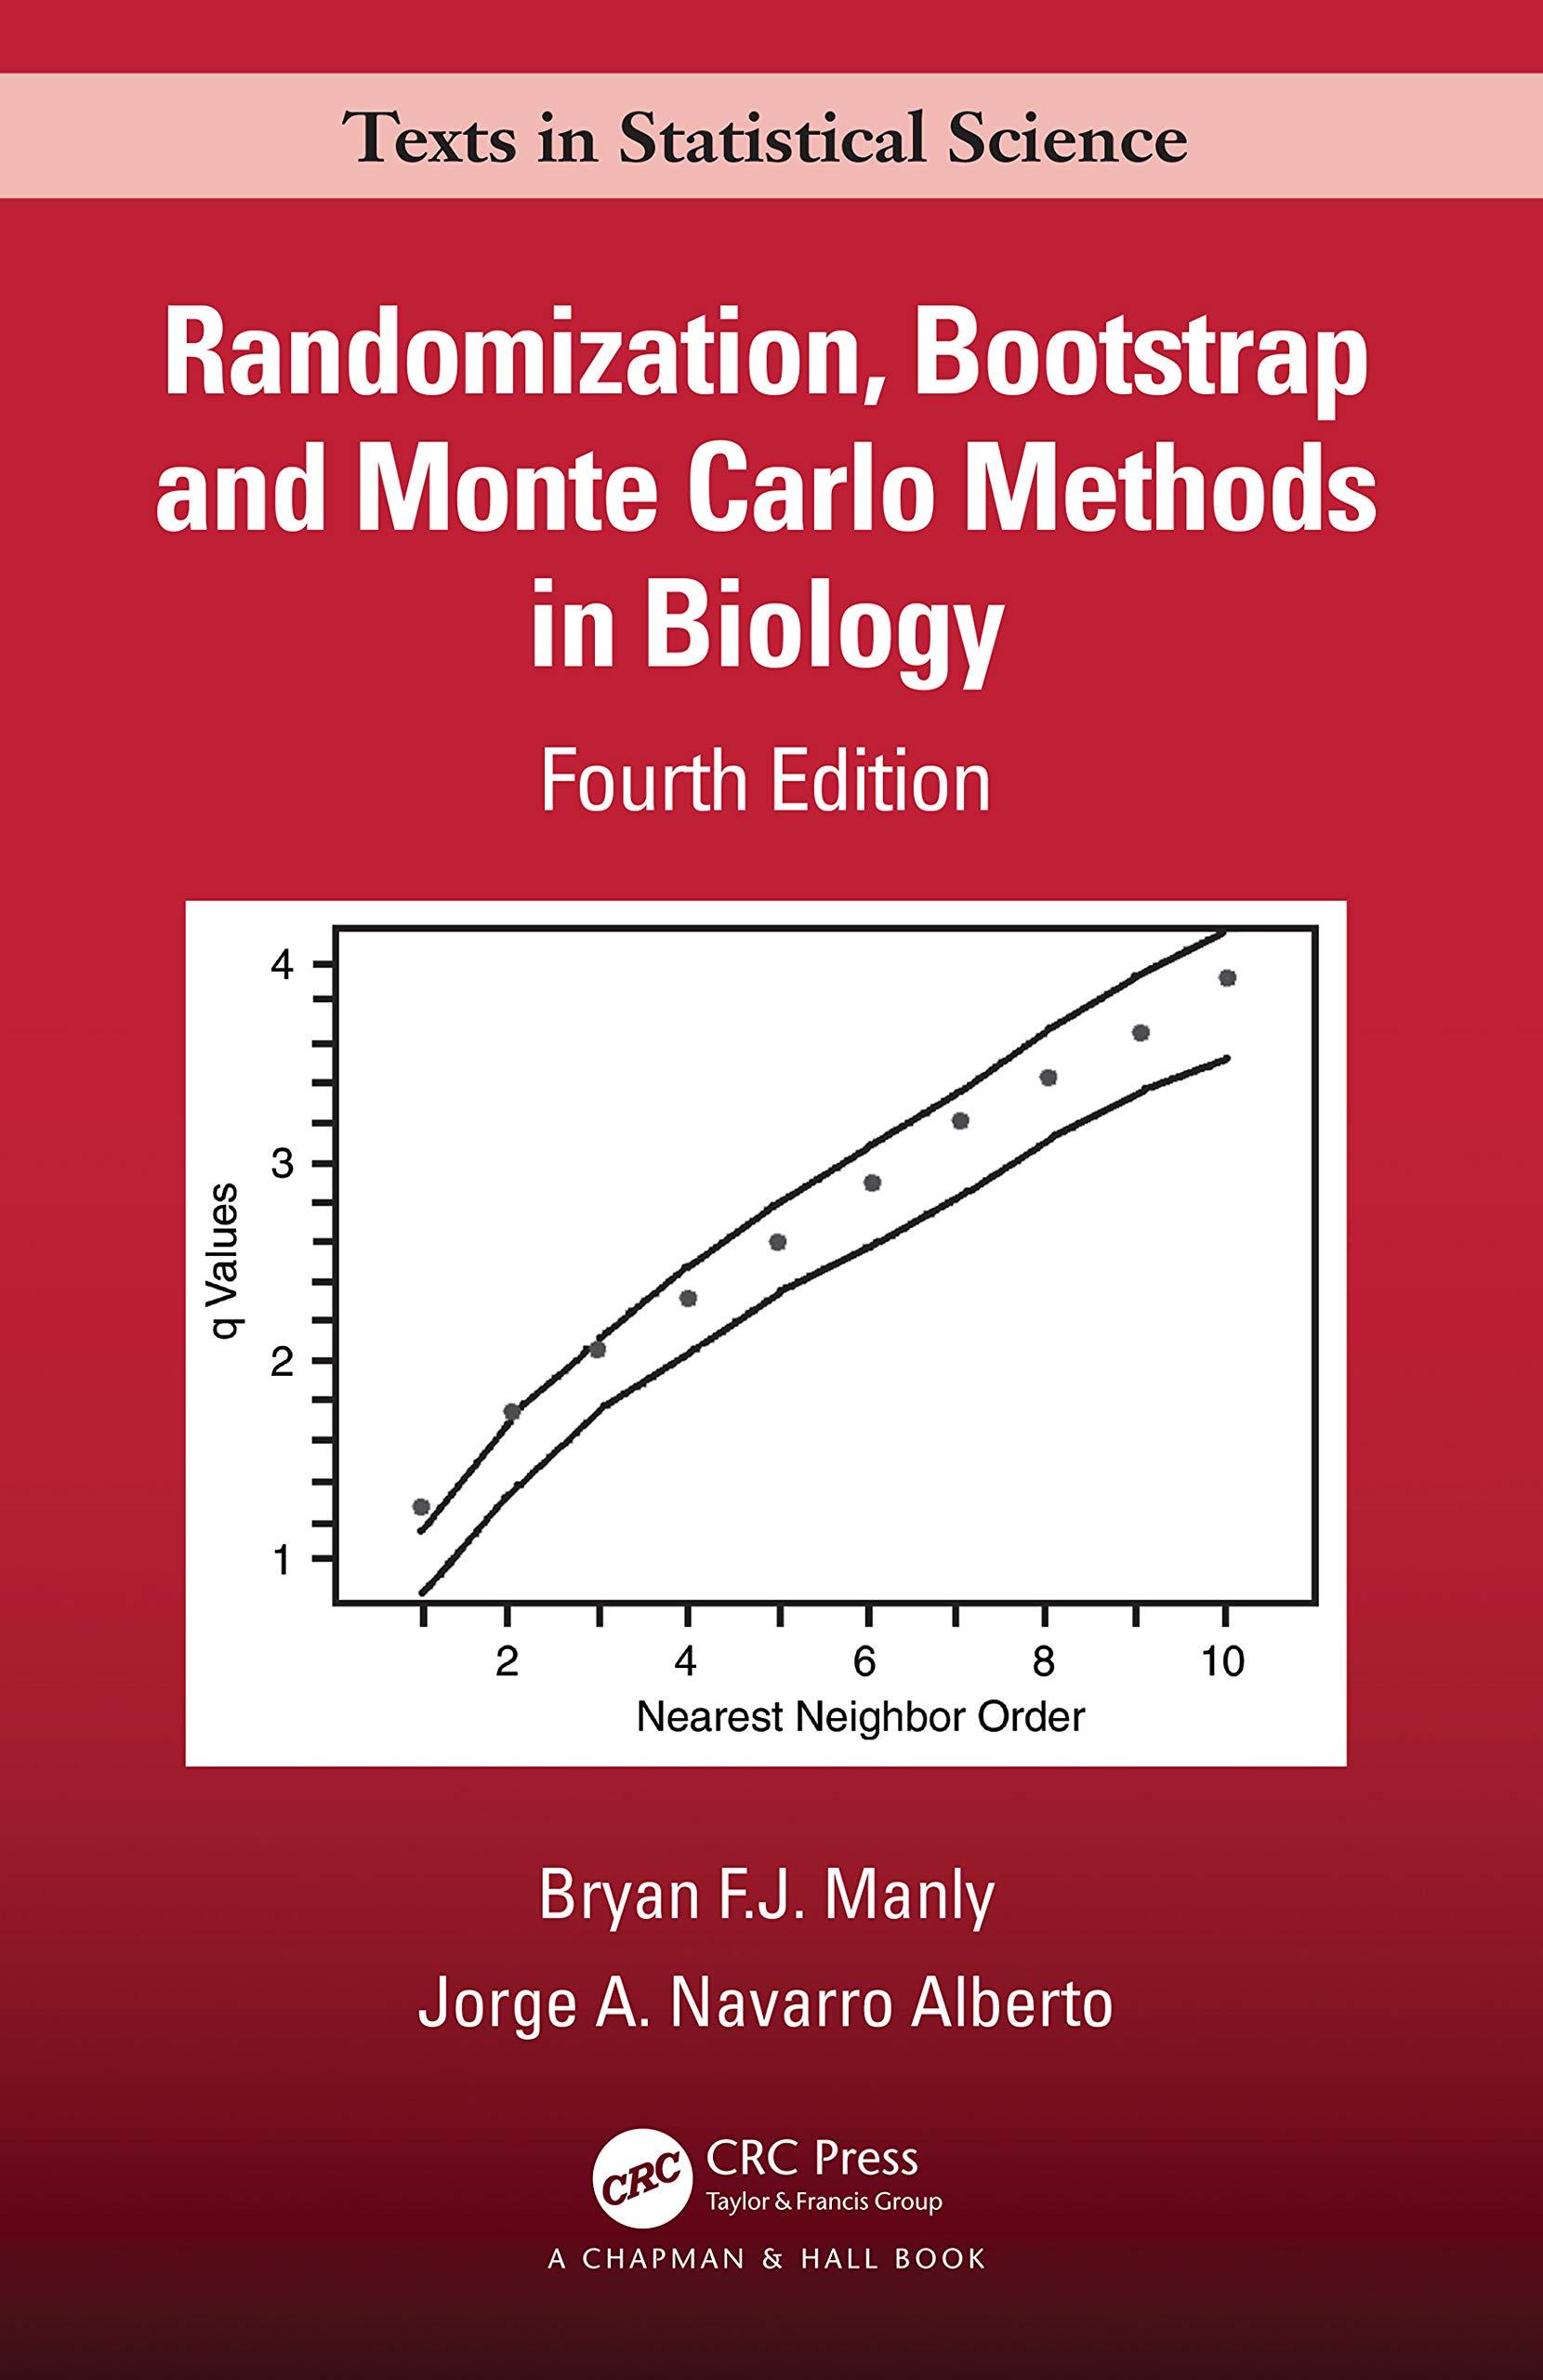 randomization bootstrap and monte carlo methods in biology 4th edition bryan f.j. manly, jorge a. navarro